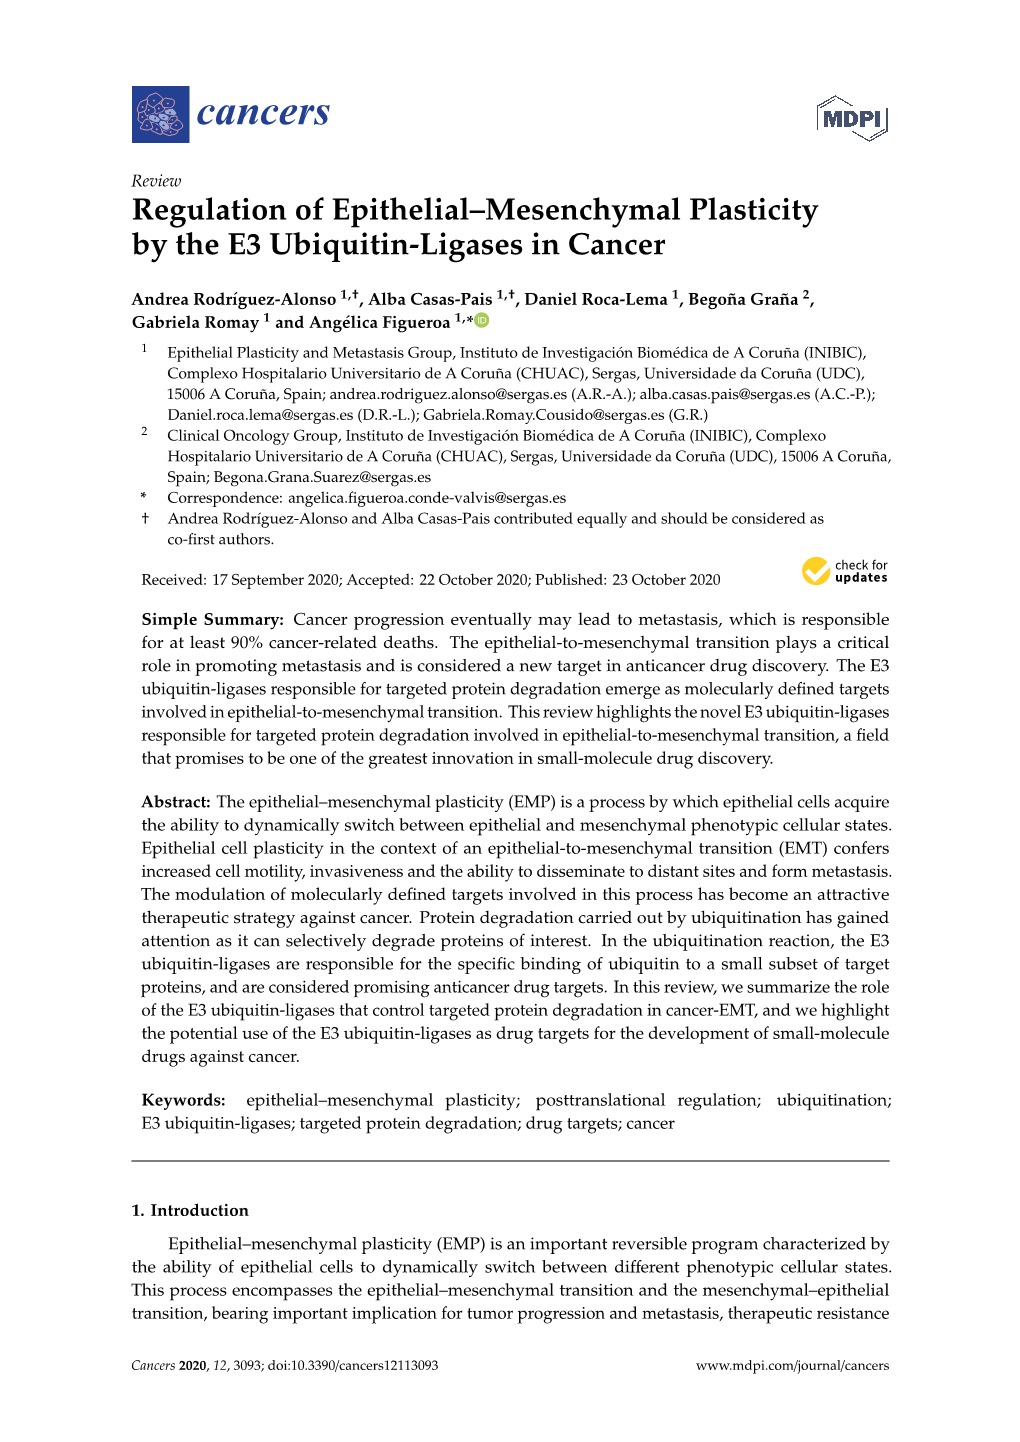 Regulation of Epithelial–Mesenchymal Plasticity by the E3 Ubiquitin-Ligases in Cancer